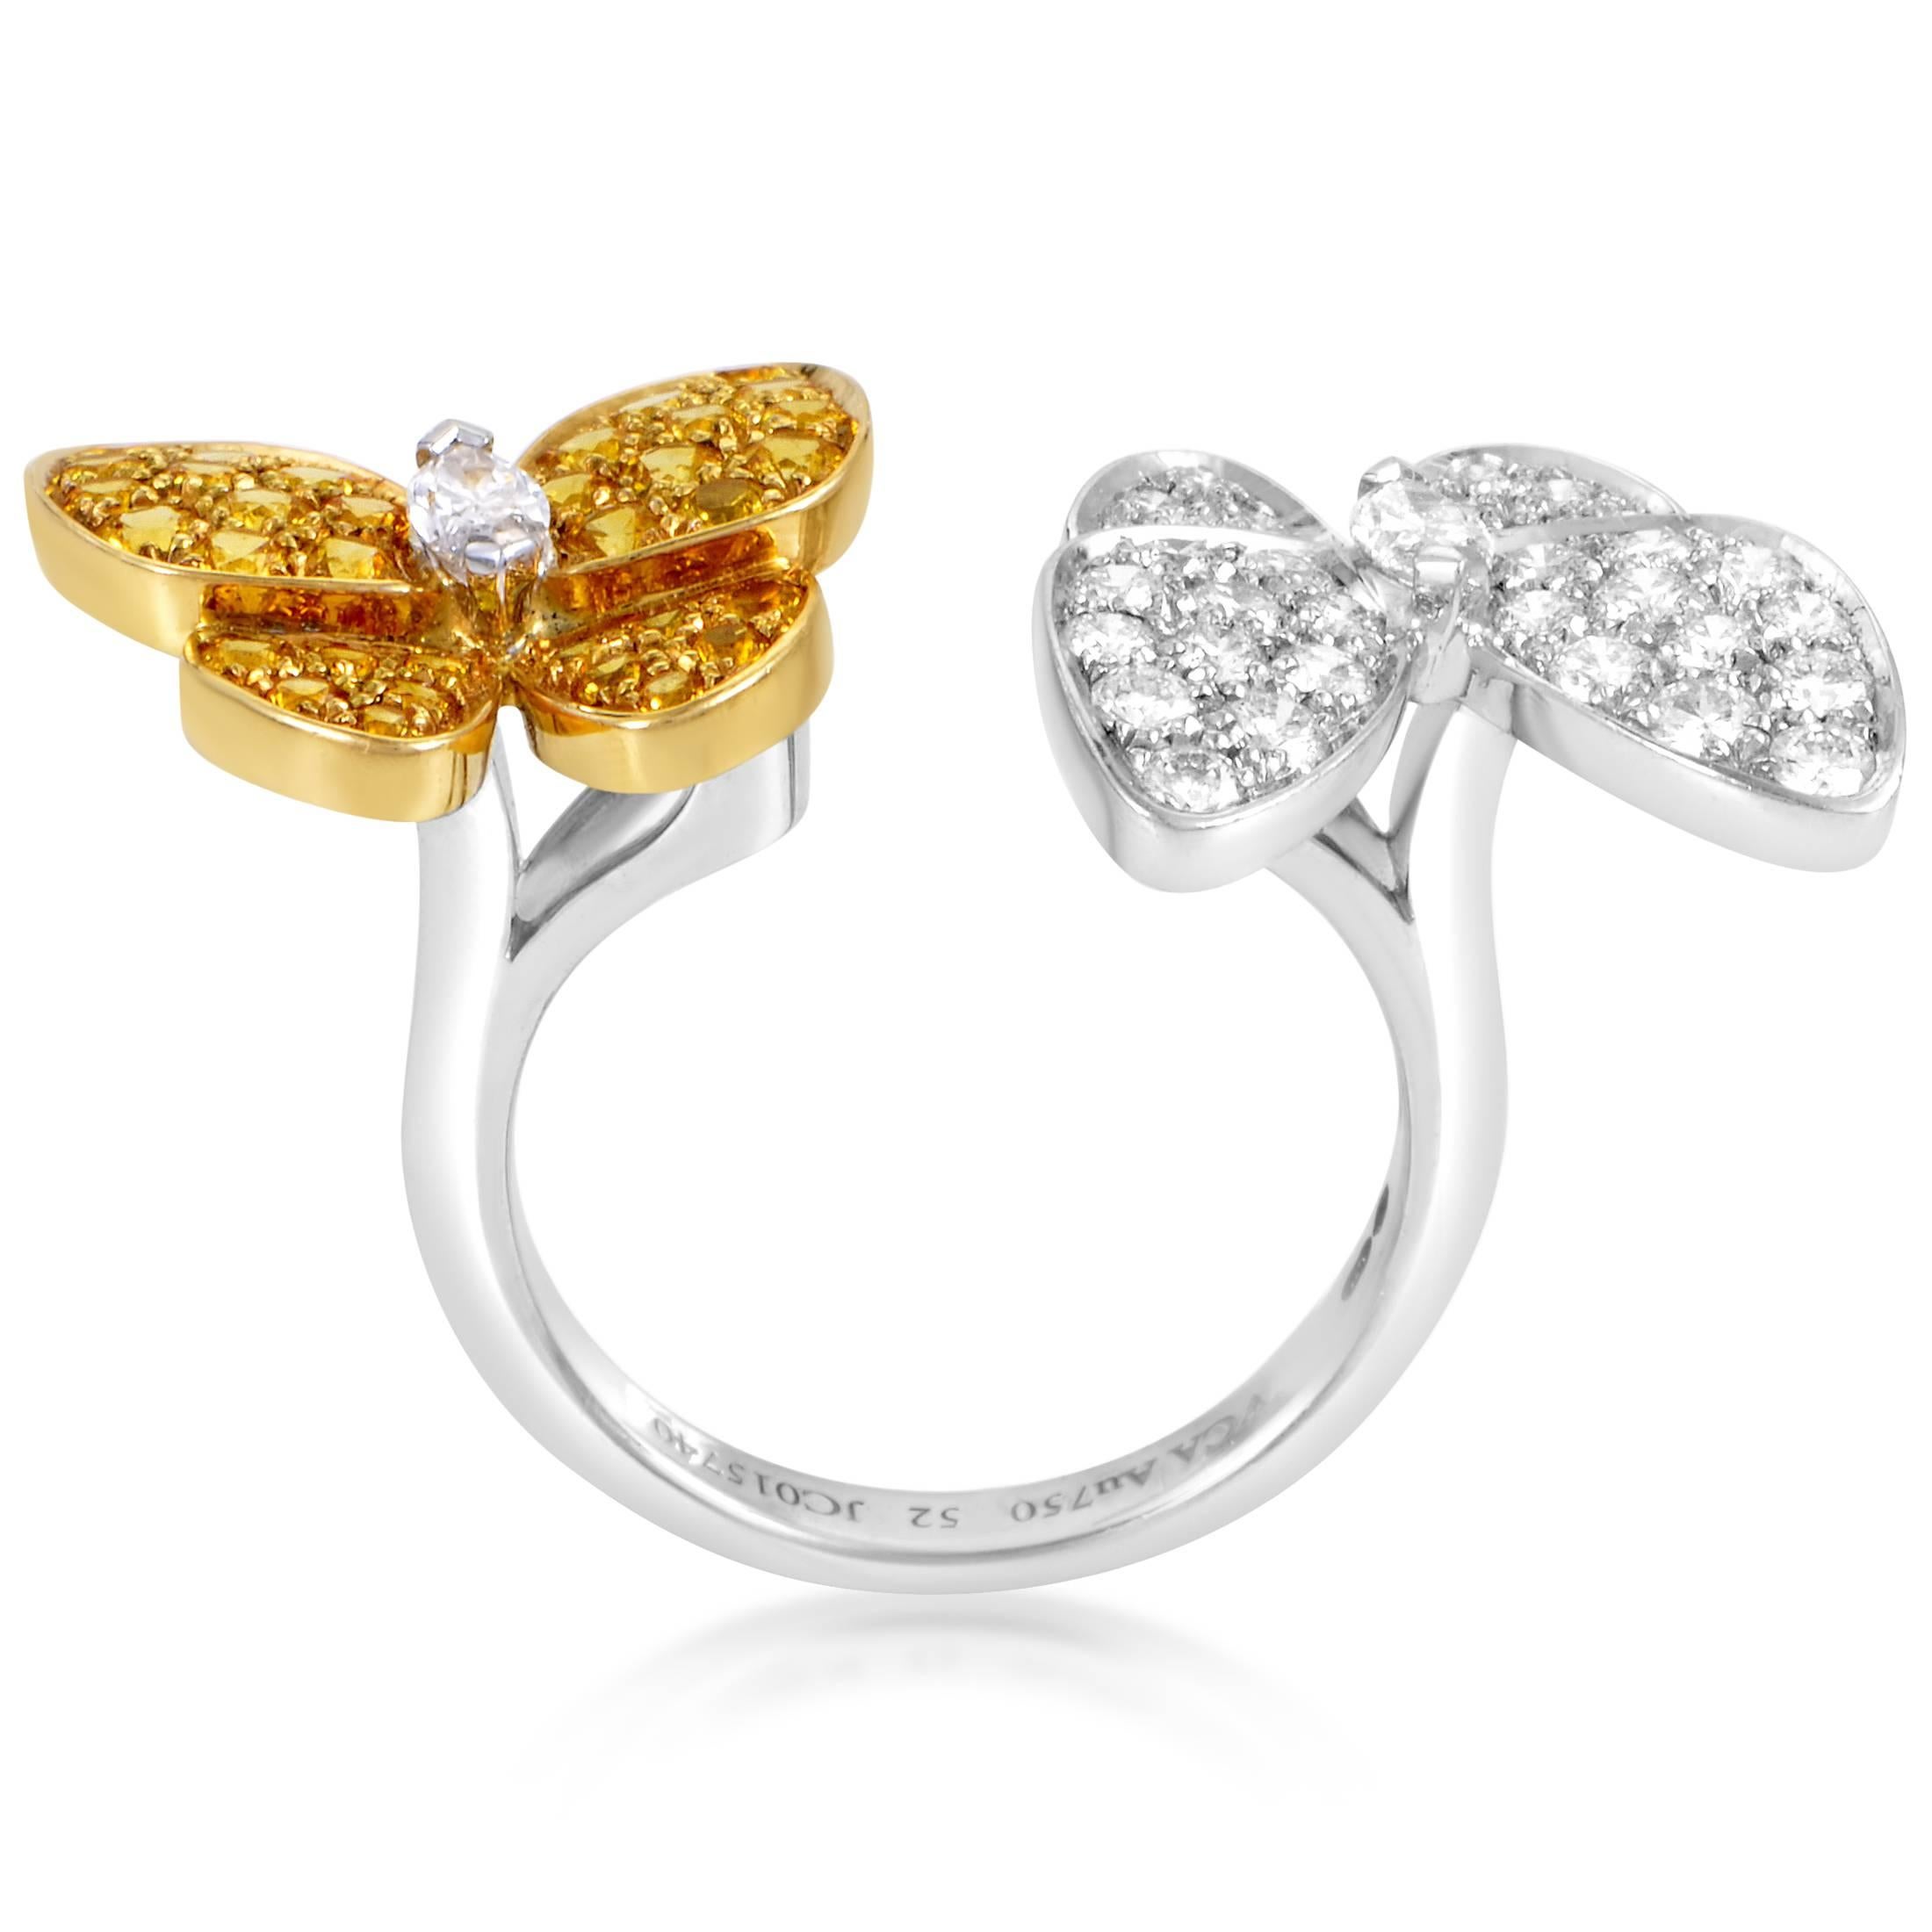 Adorned with stunning D-color diamonds of VVS clarity weighing in total 0.99ct as well as gorgeous yellow sapphires totaling 0.88ct, this enchanting ring from Van Cleef & Arpels features a tasteful blend of shimmering 18K white gold and exuberant